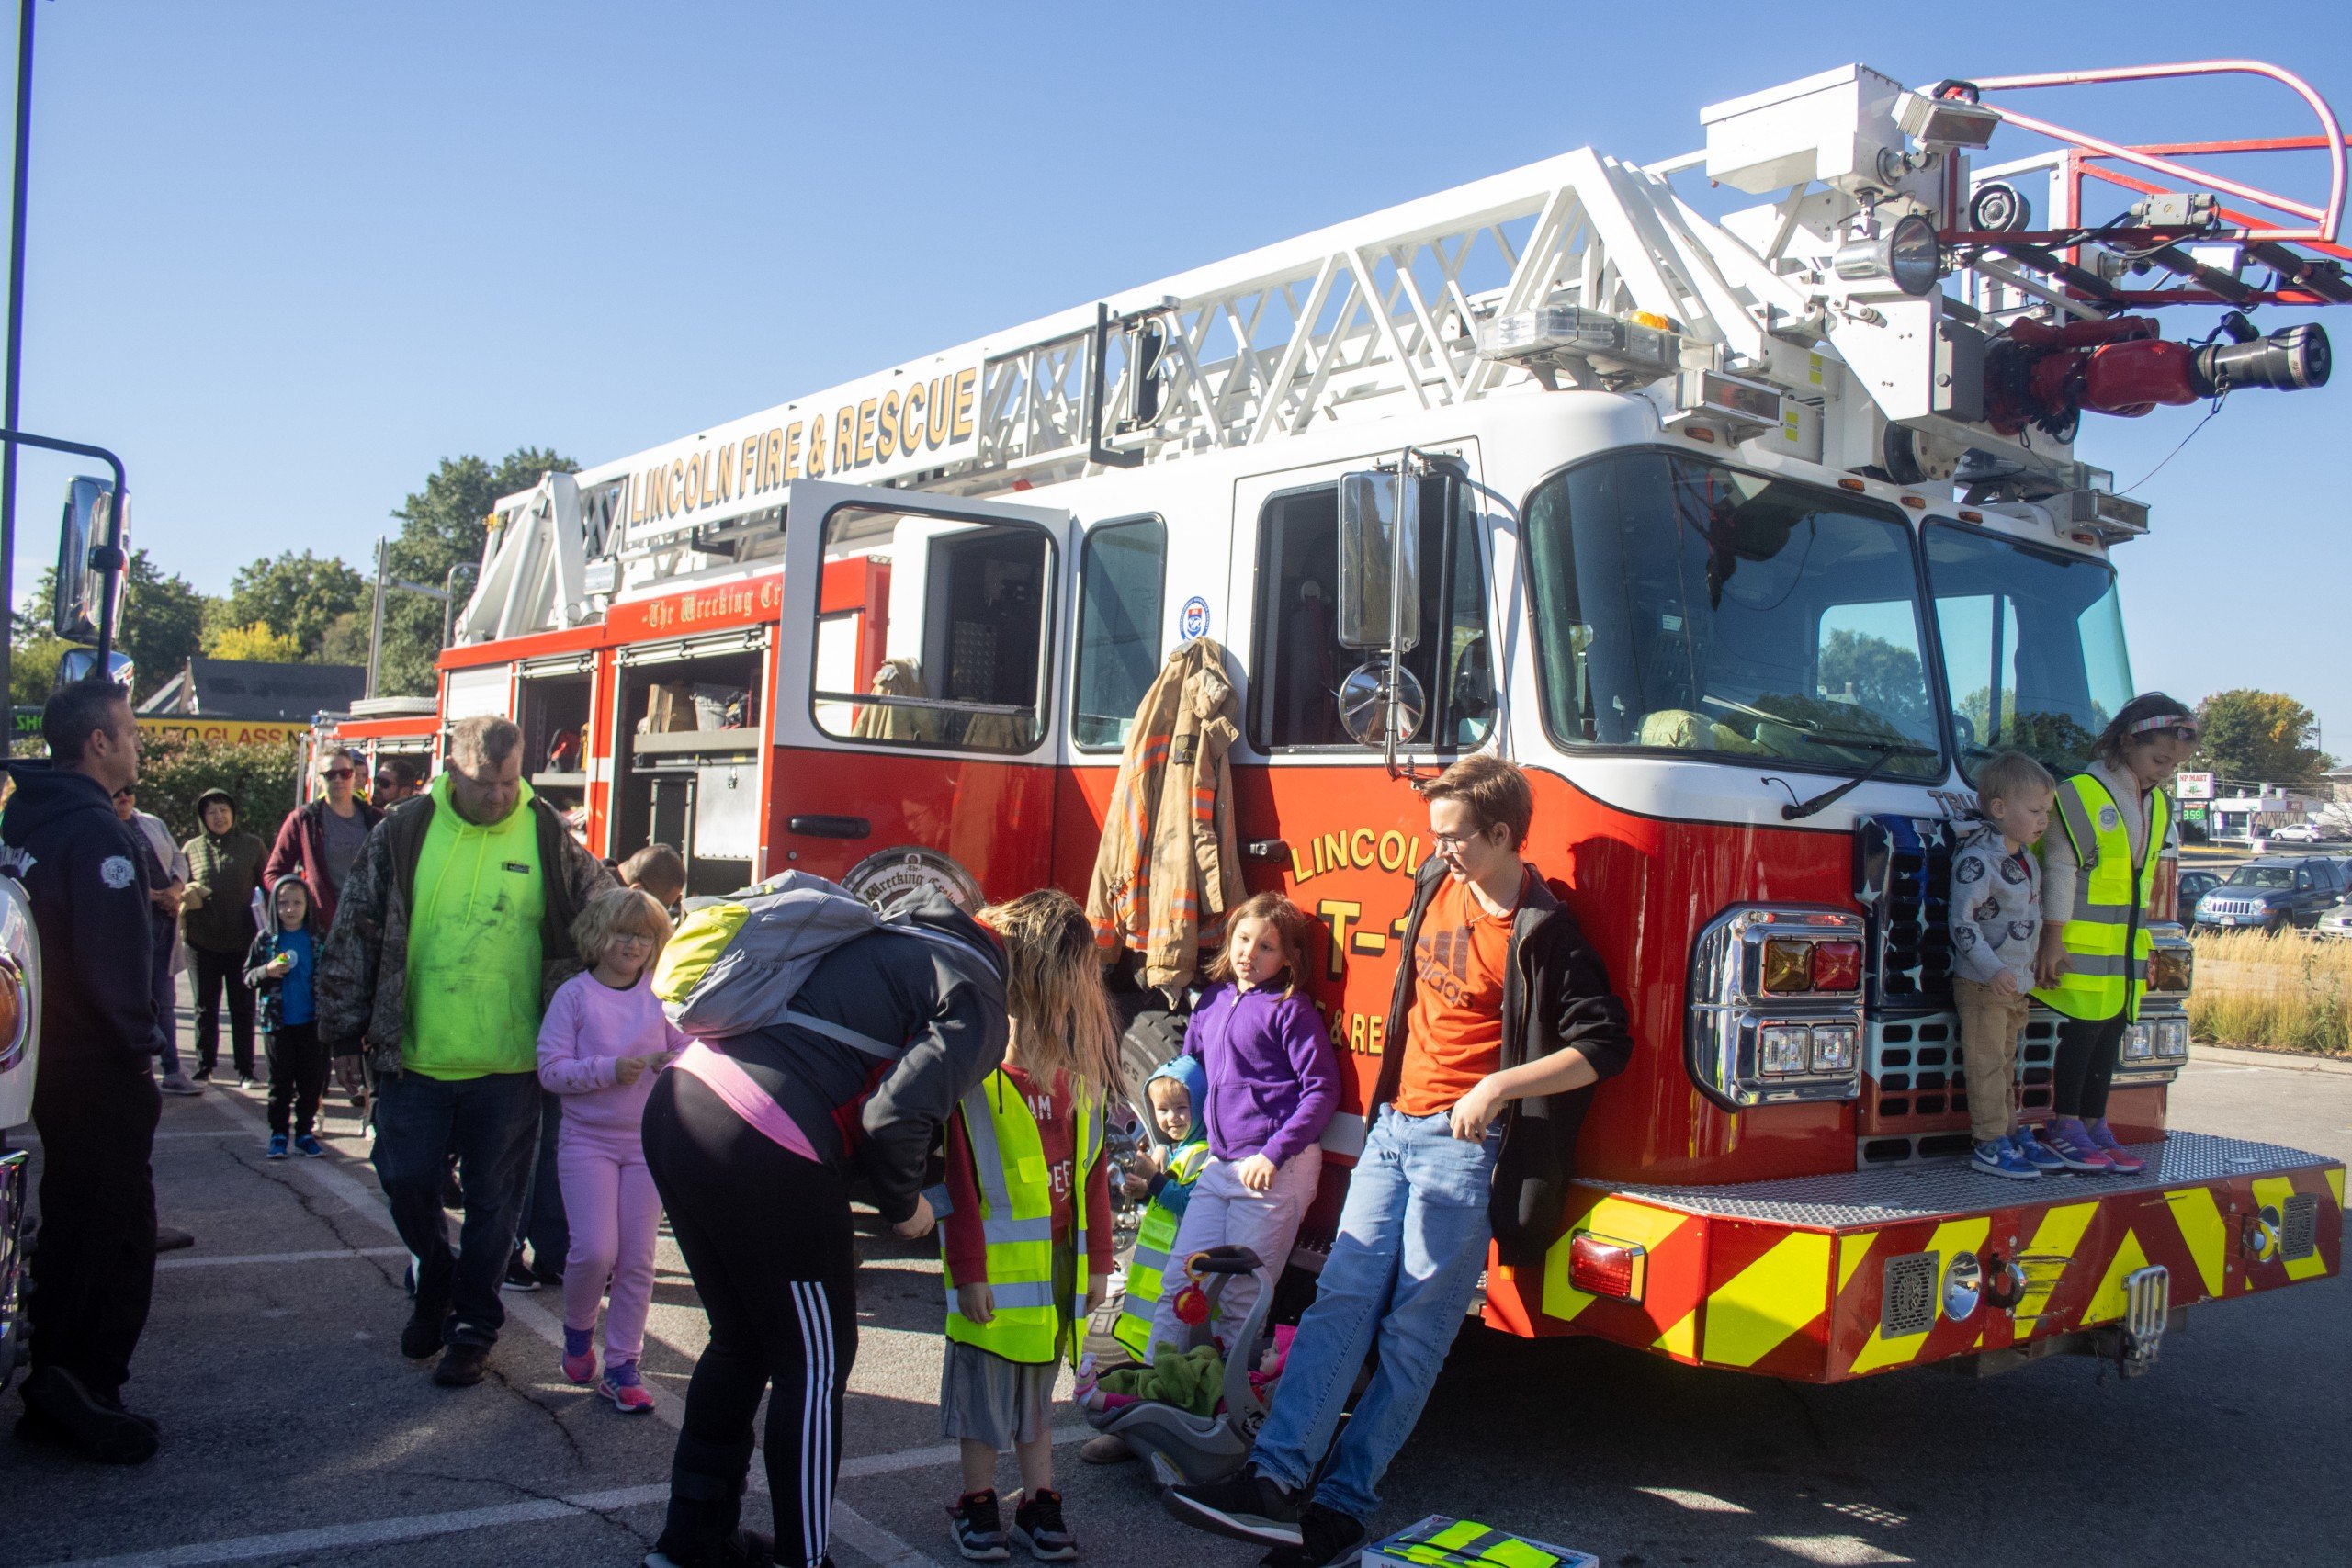 Touch-A-Truck encourages highway traffic safety